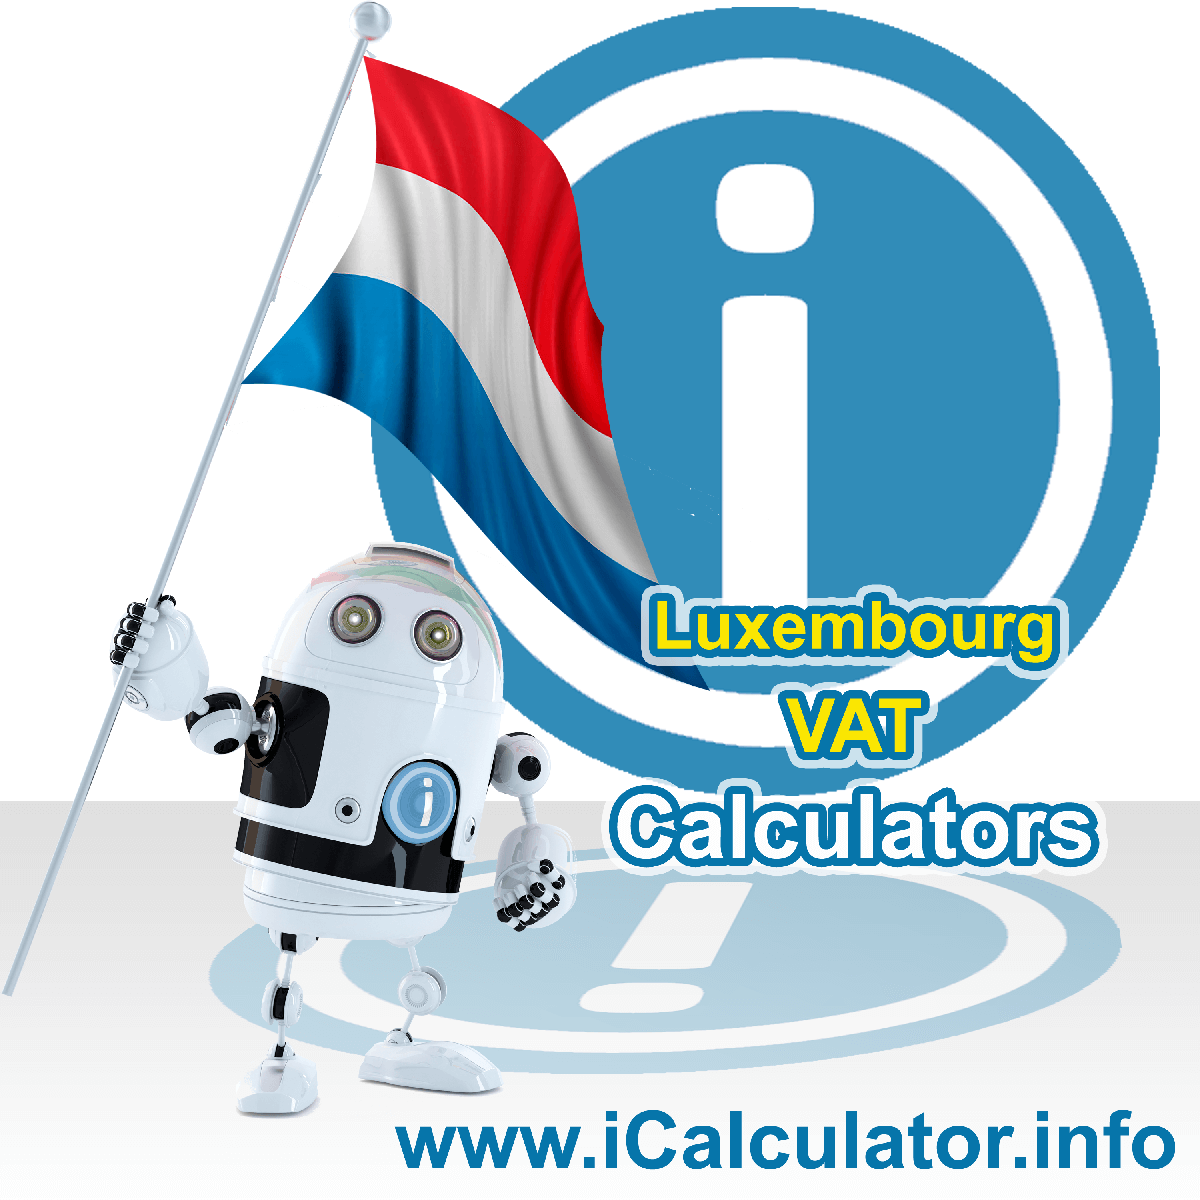 Luxembourg VAT Calculator. This image shows the Luxembourg flag and information relating to the VAT formula used for calculating Value Added Tax in Luxembourg using the Luxembourg VAT Calculator in 2022